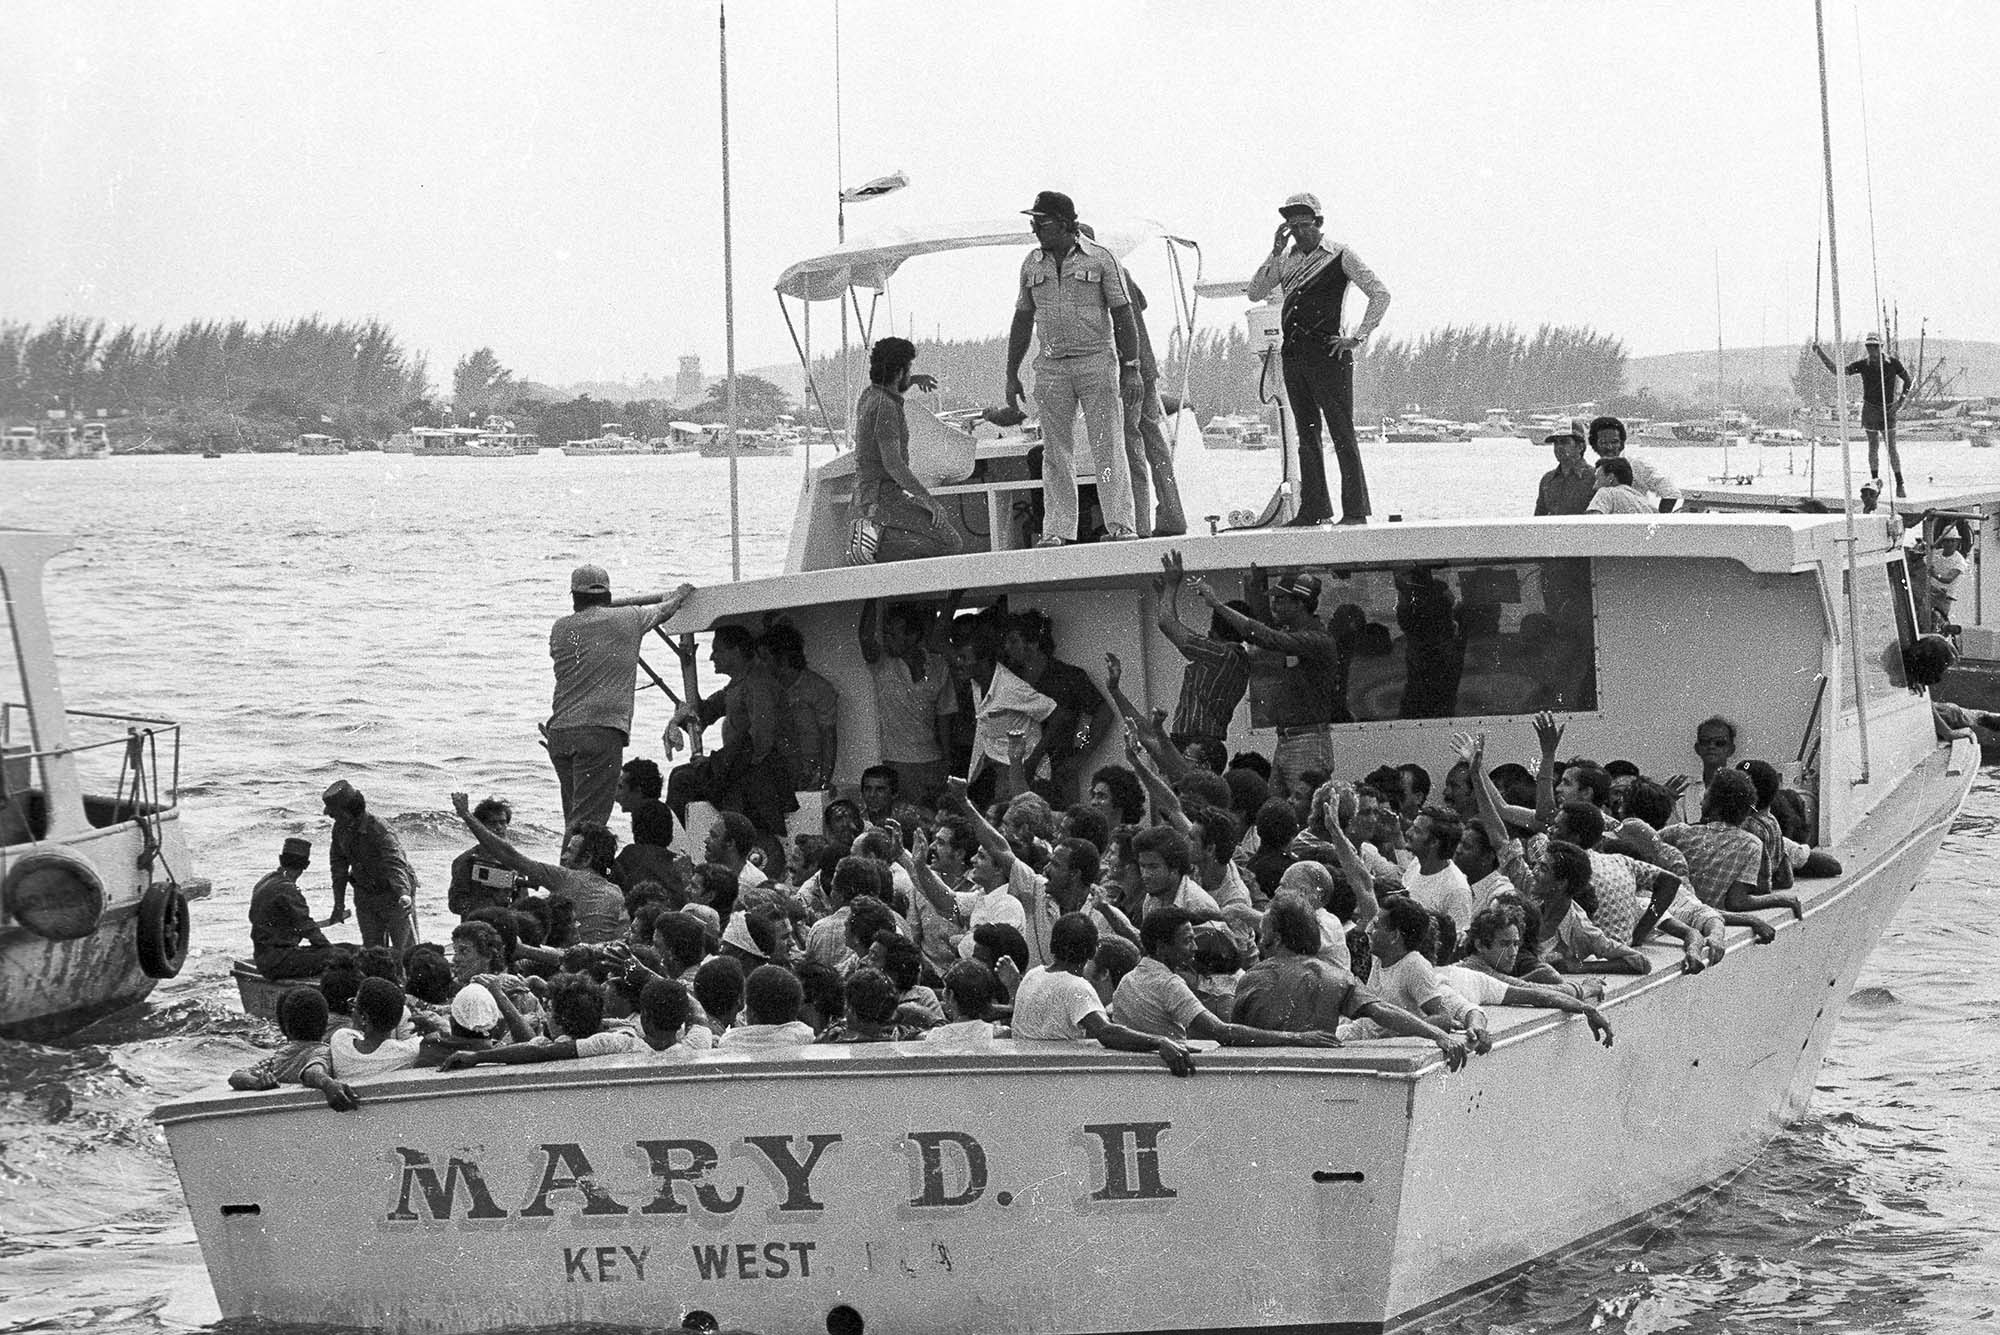 immigrants in 1960 s